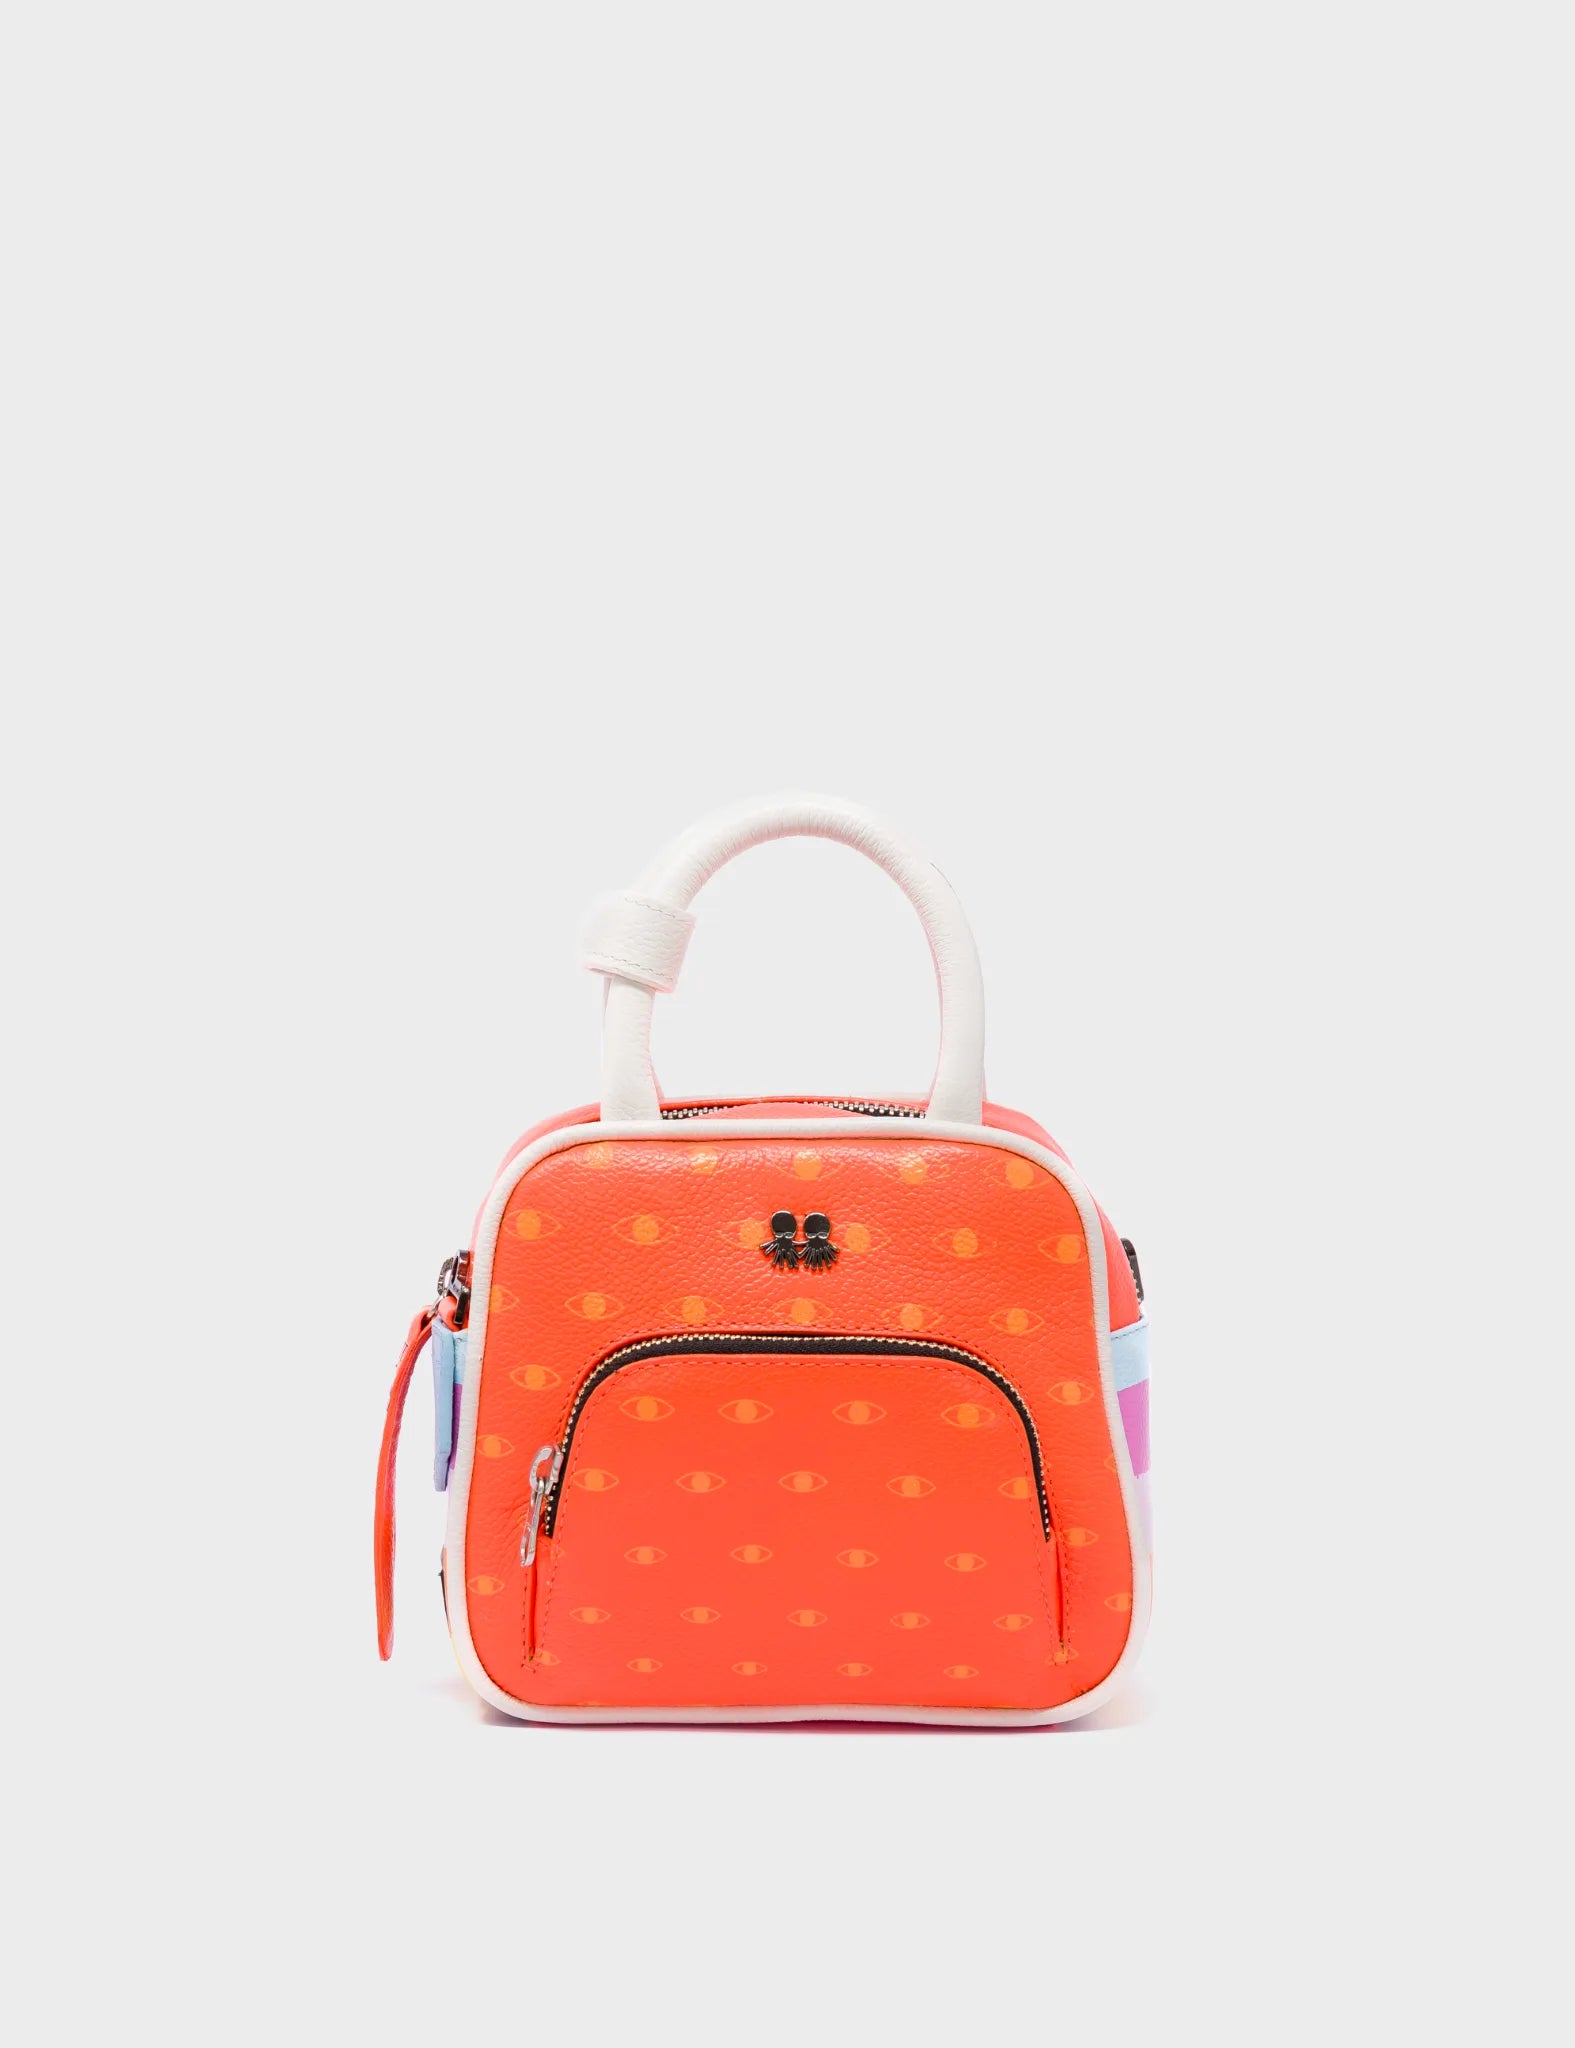 Small Crossbody Neon Orange Leather Bag - Eyes Pattern Printed - Front 